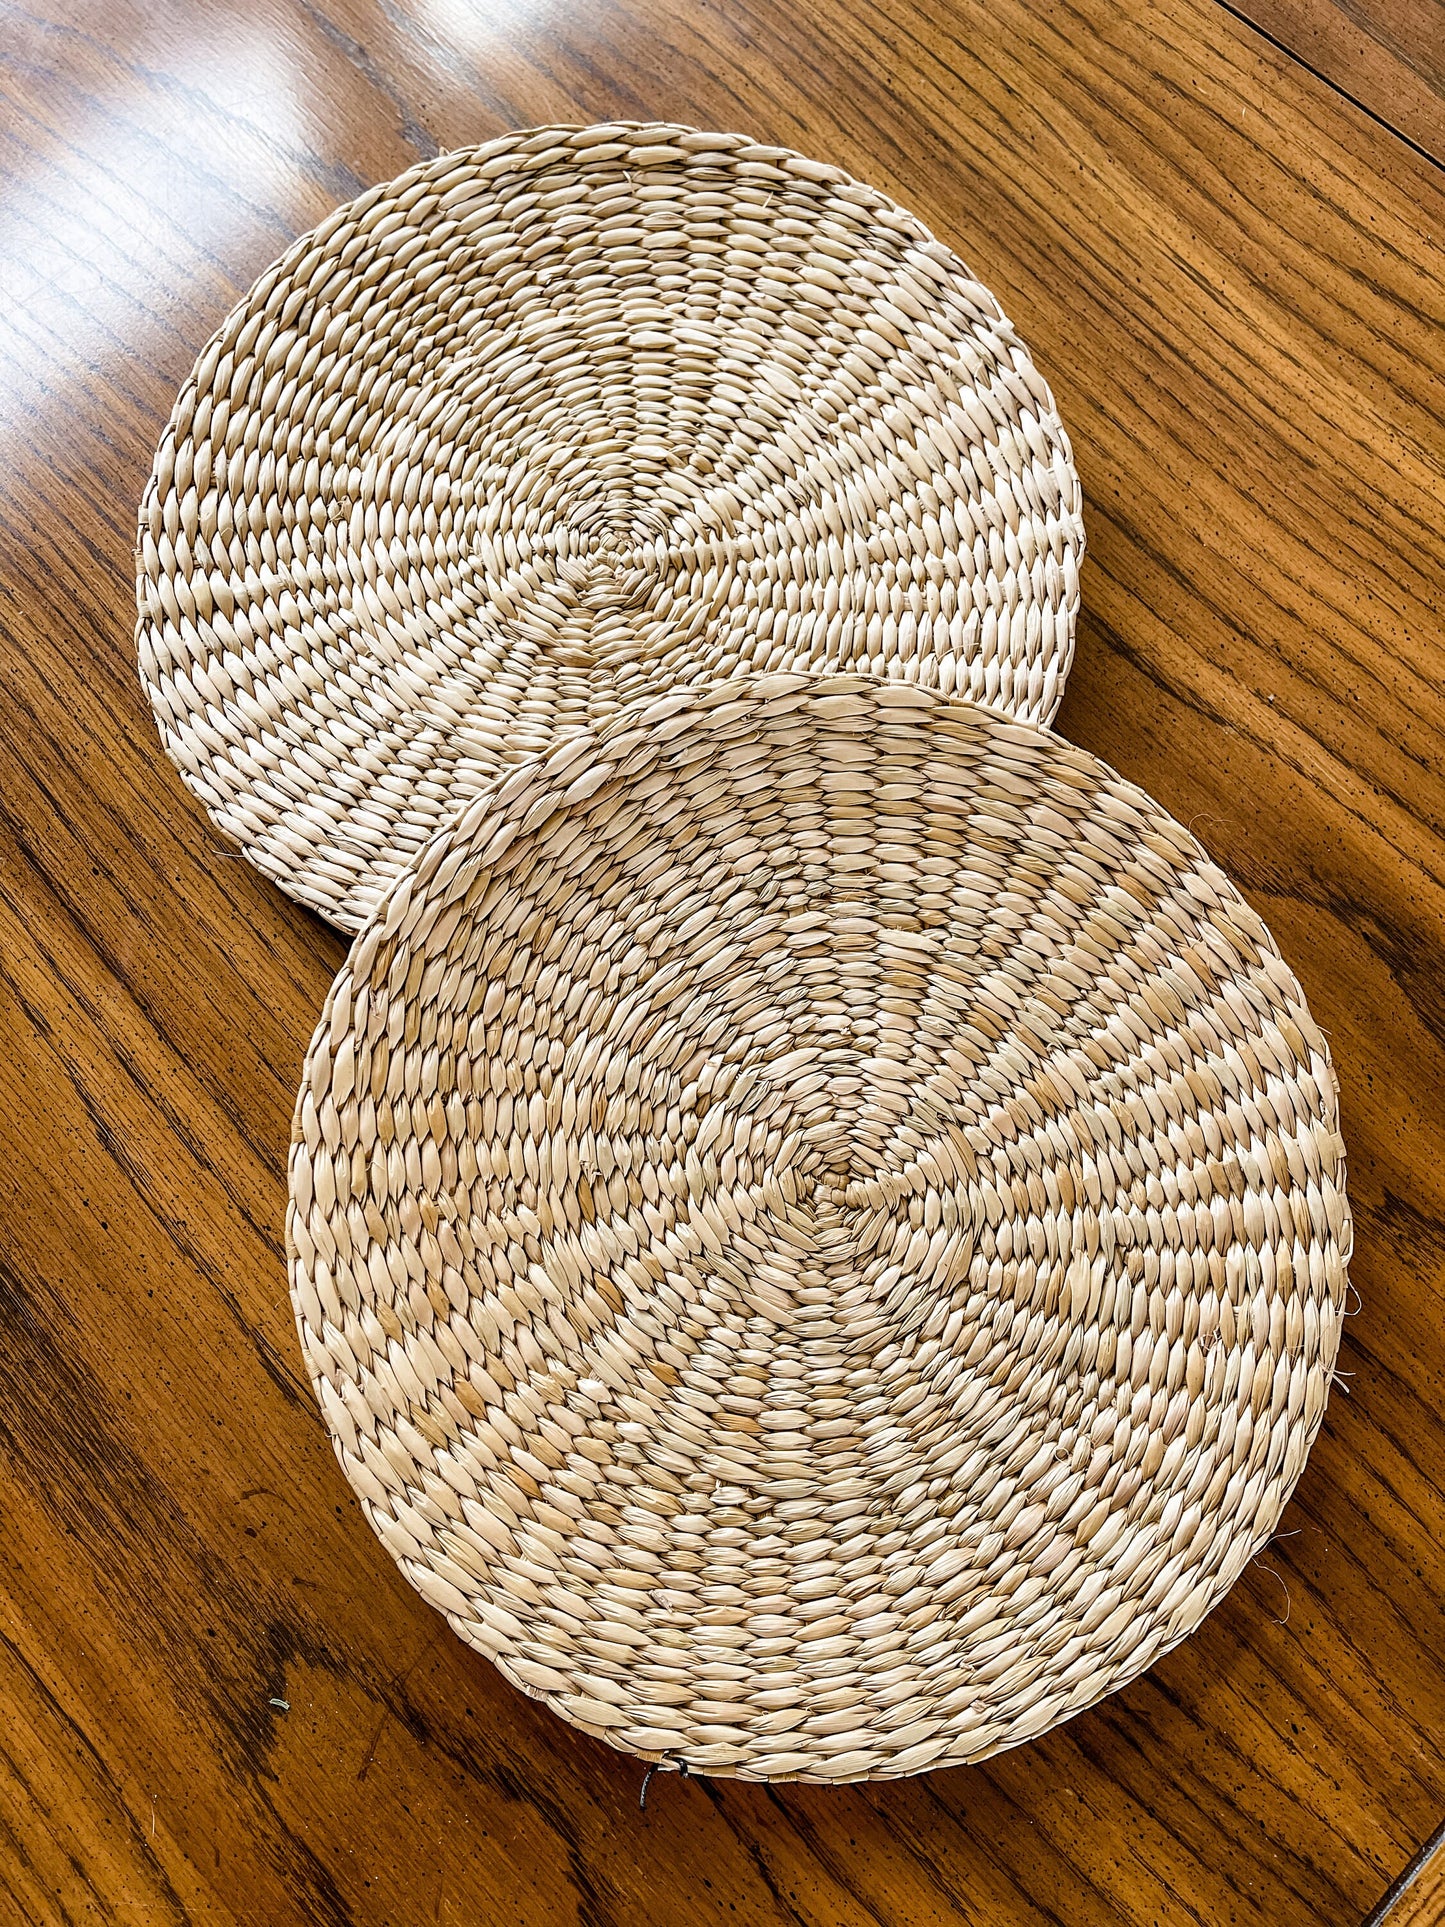 Woven Round Grass Placemats (Set of 2)